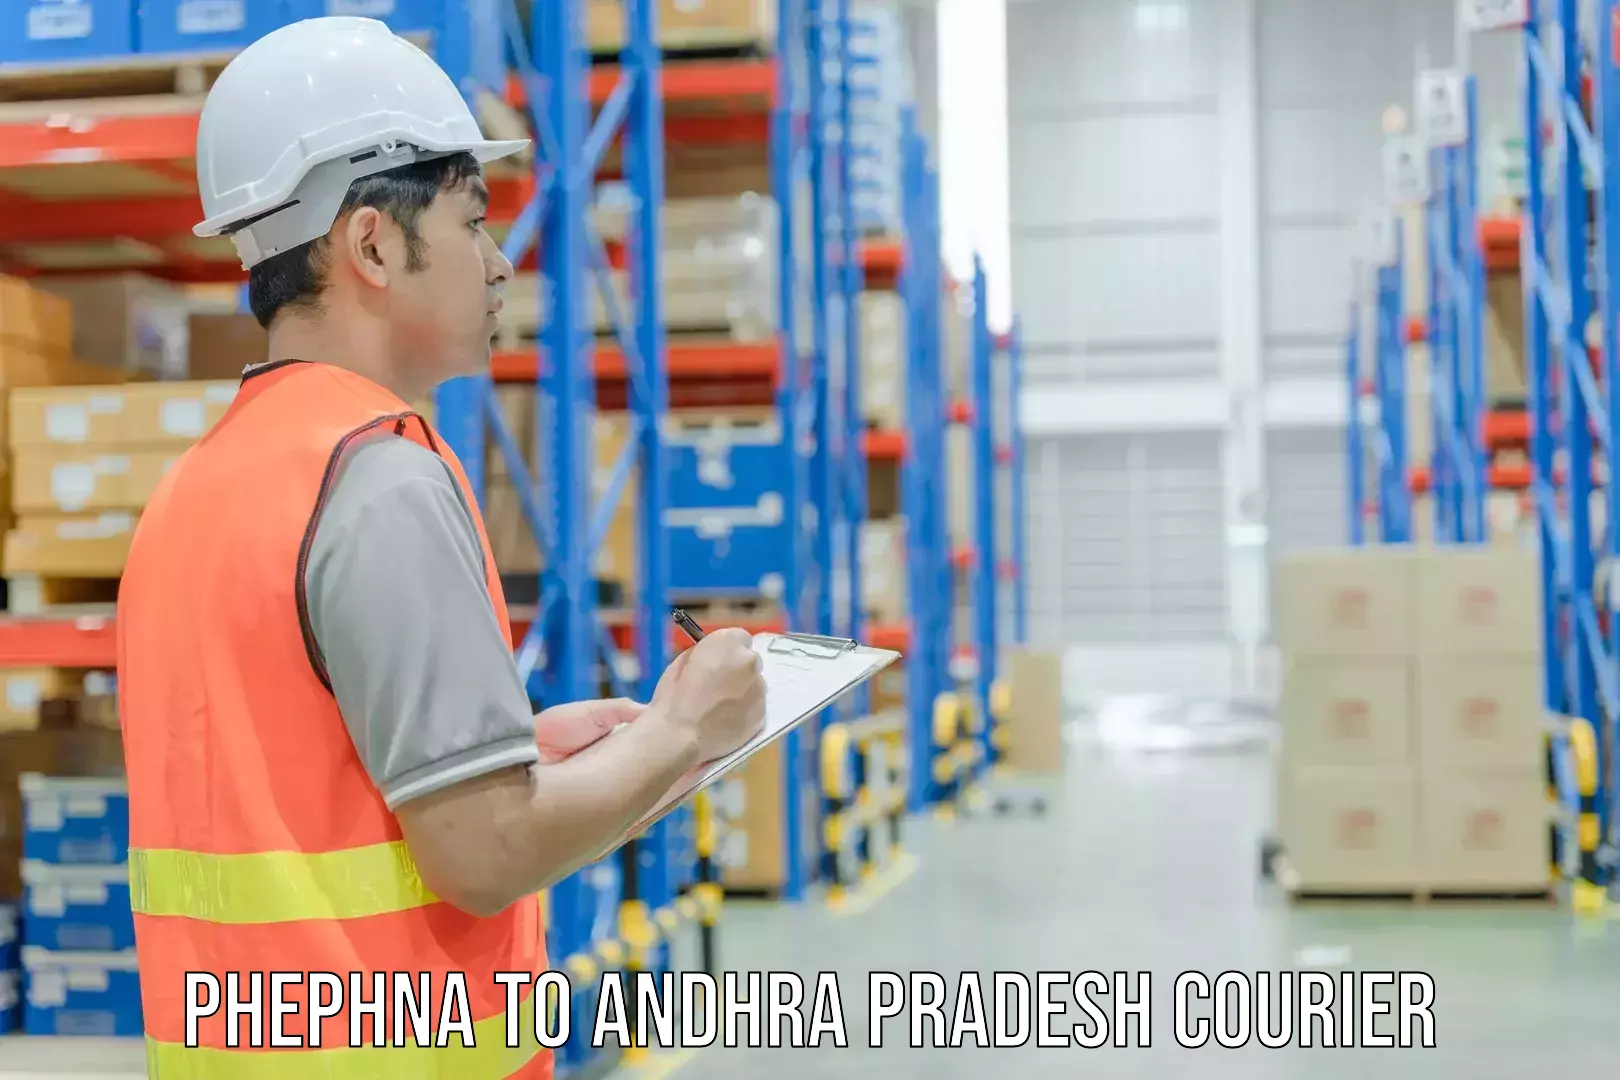 Express delivery capabilities Phephna to Alur